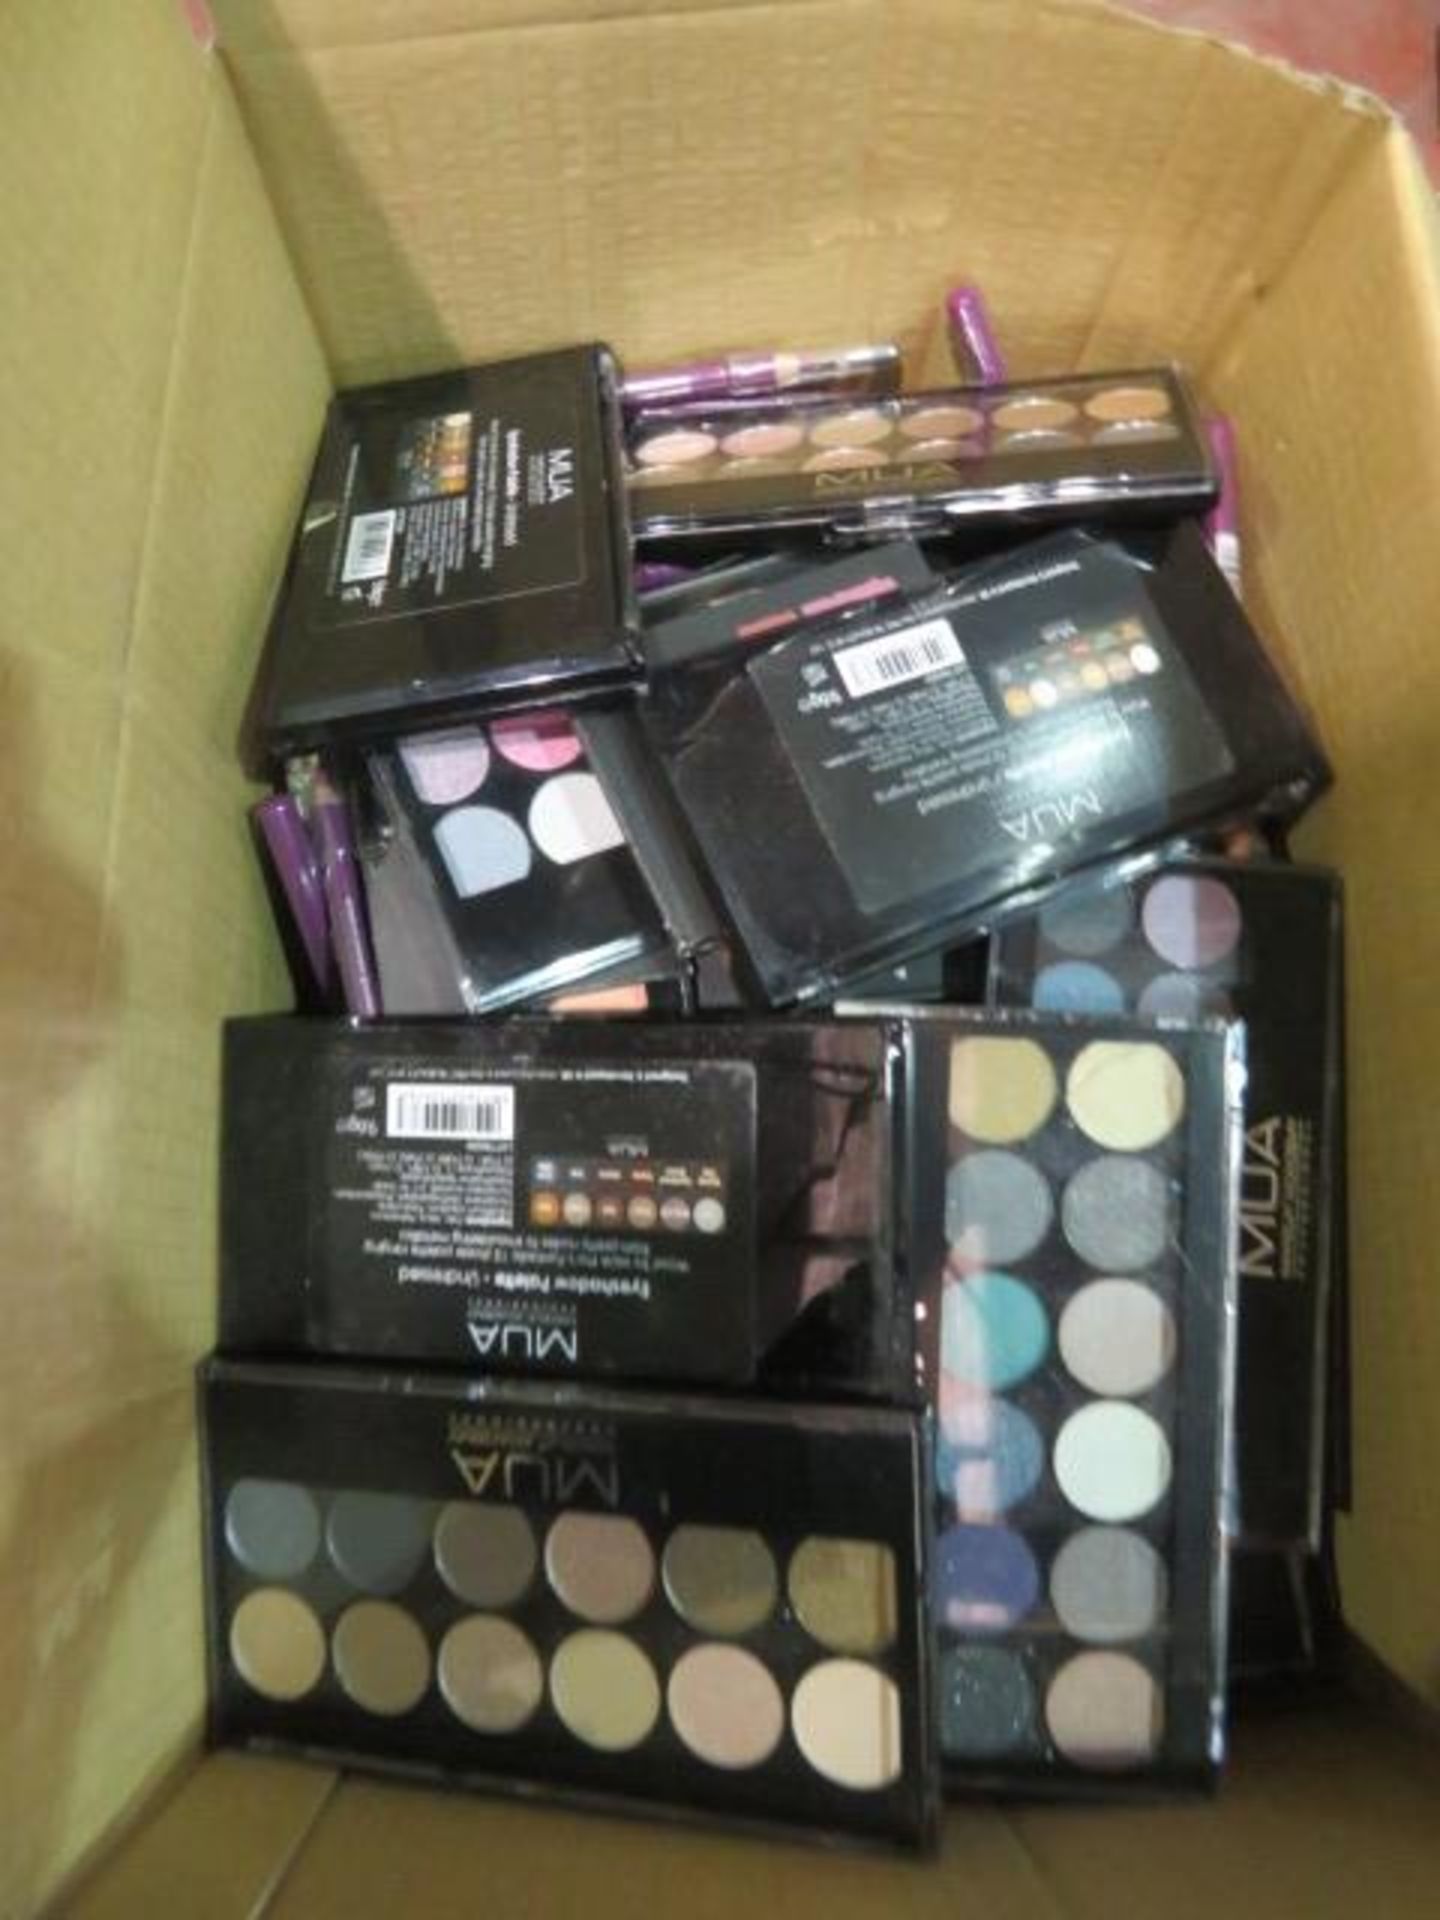 Circa. 200 items of various new make up acadamy make up to include: paintbox multishade lip palette,